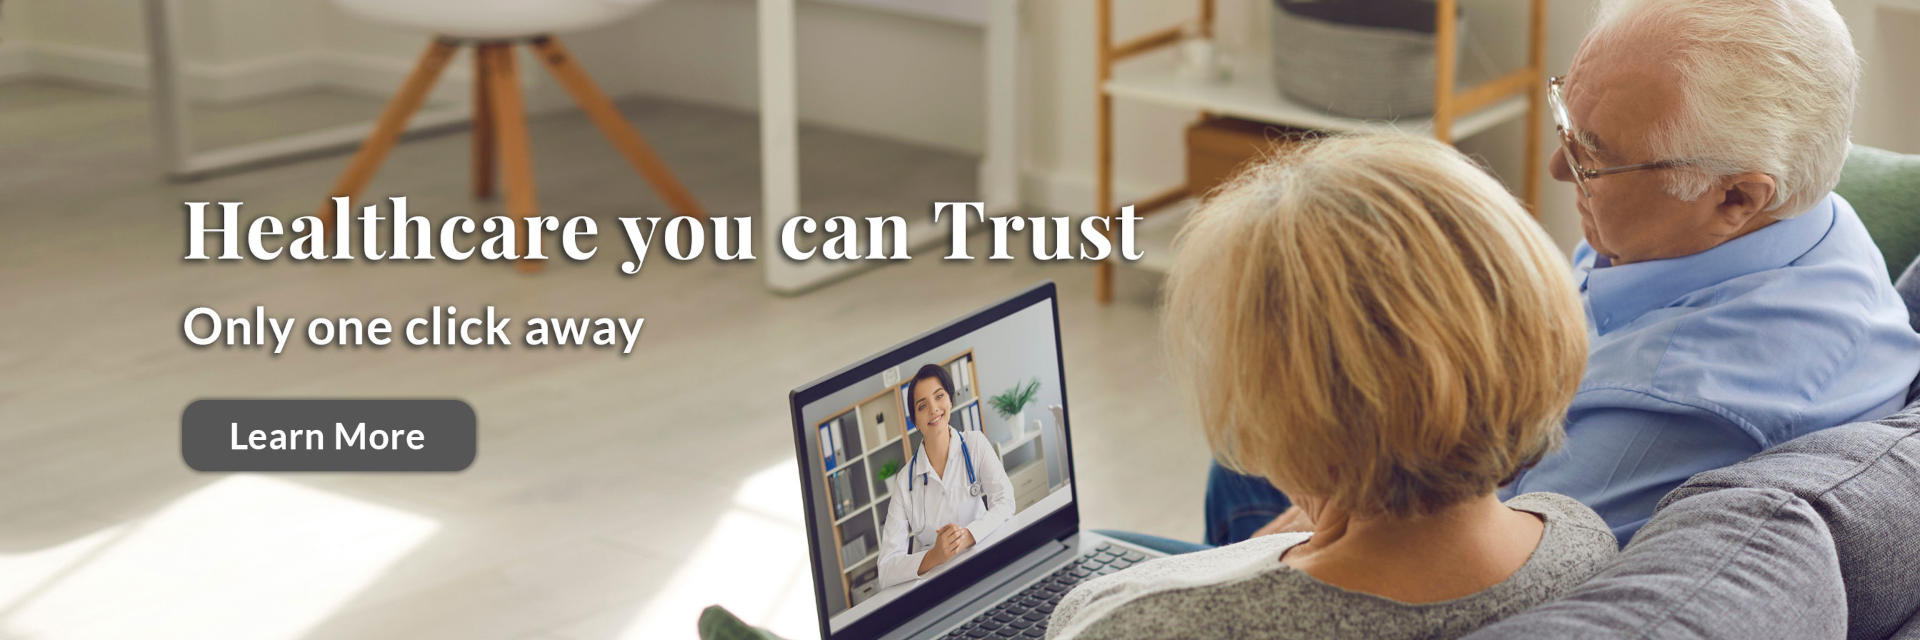 Banner picture of an elderly couple sitting on a couch with an open laptop of a female Physician smiling at them.